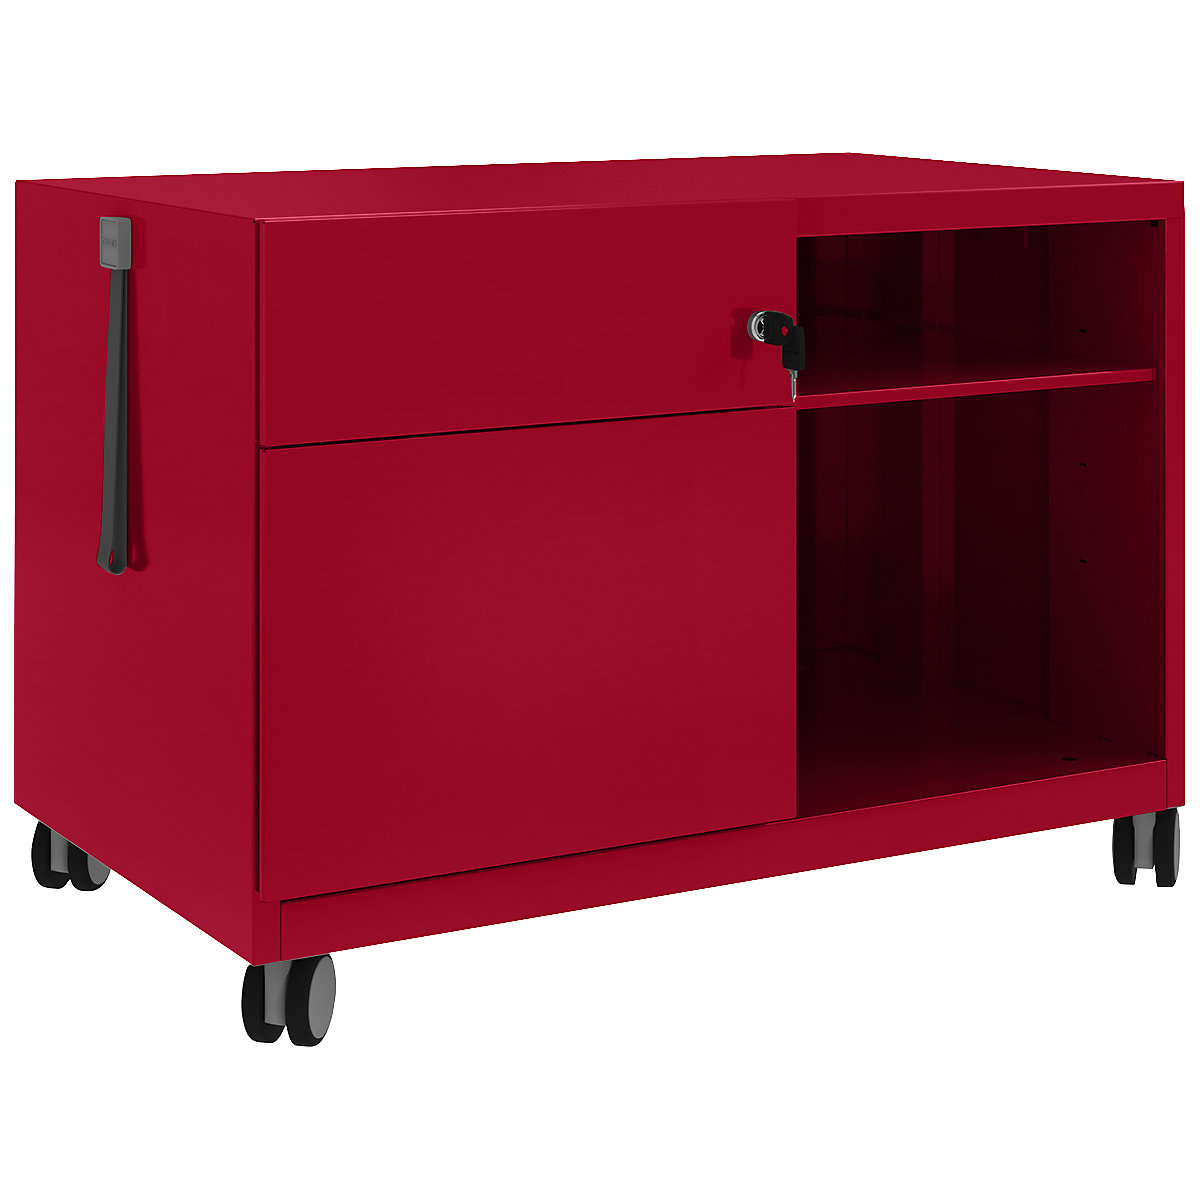 Note™ CADDY, alt. x largh. x prof. 563 x 800 x 490 mm – BISLEY, a sinistra 1 cassetto universale e 1 cassetto per cartelle sospese, rosso cardinale-27